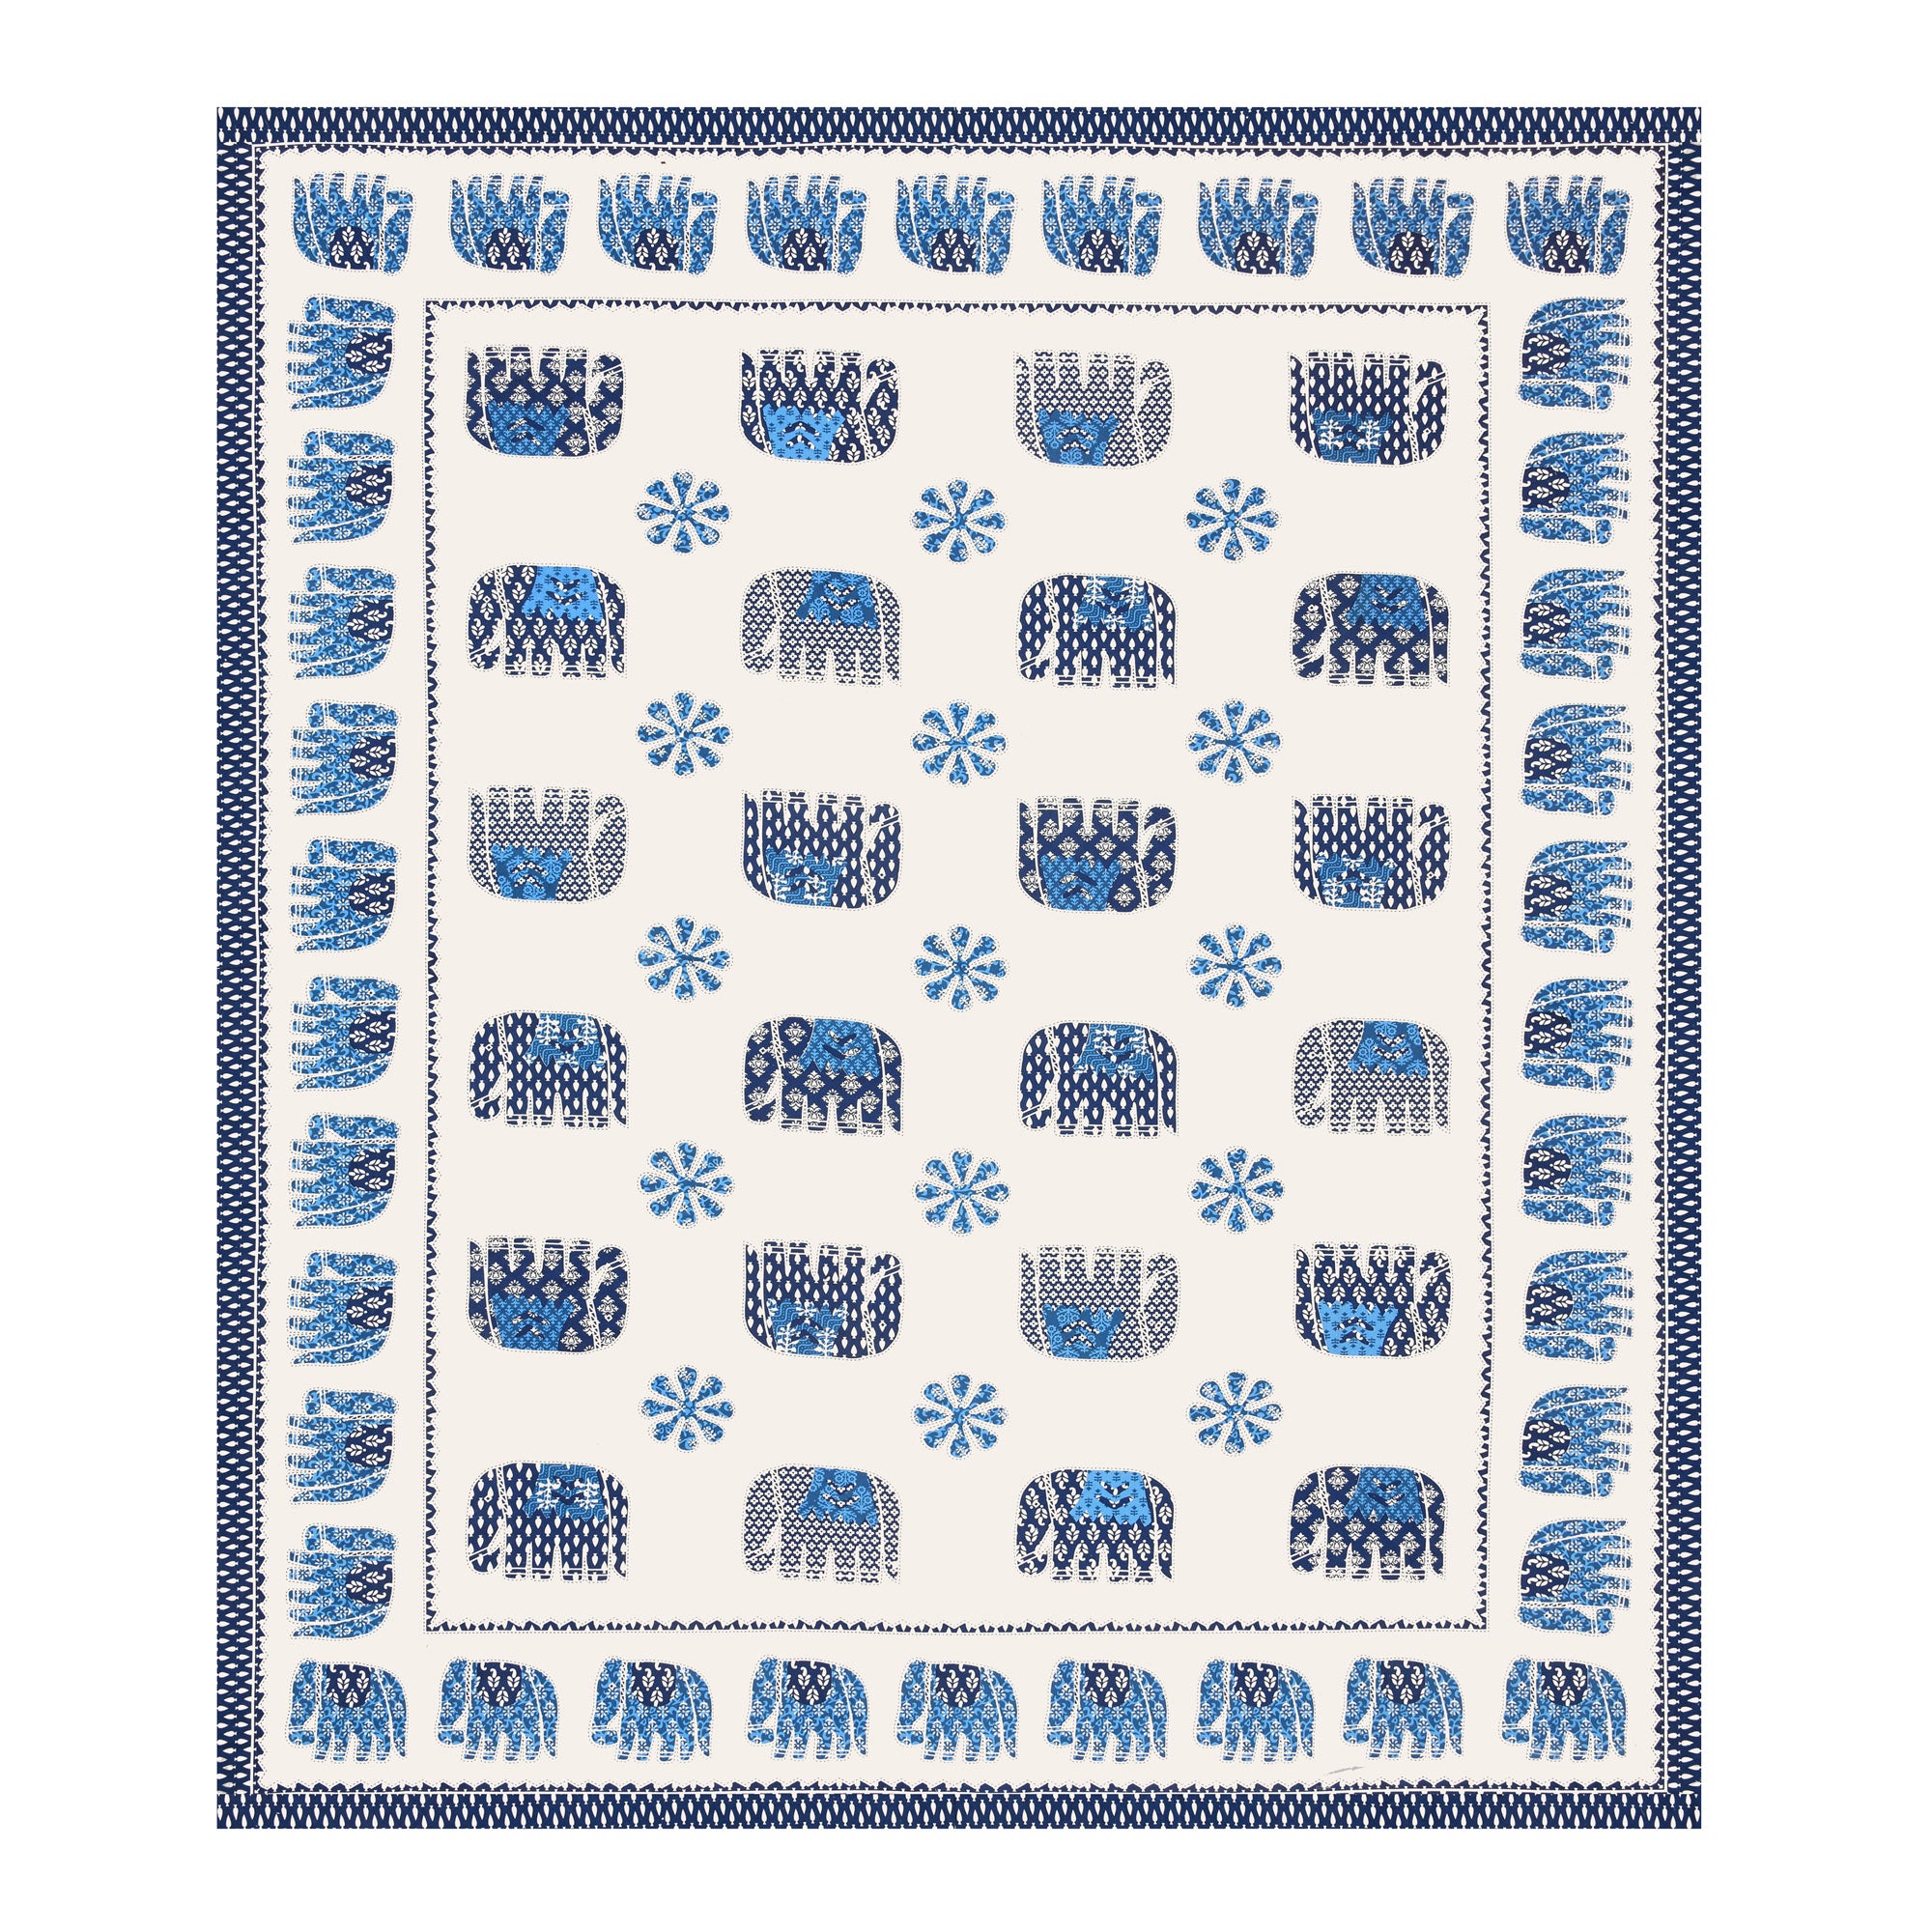 eCraftIndia Blue and White Cotton Elephant Printed 180TC King Size Double Bedsheet with 2 Pillow Covers 6